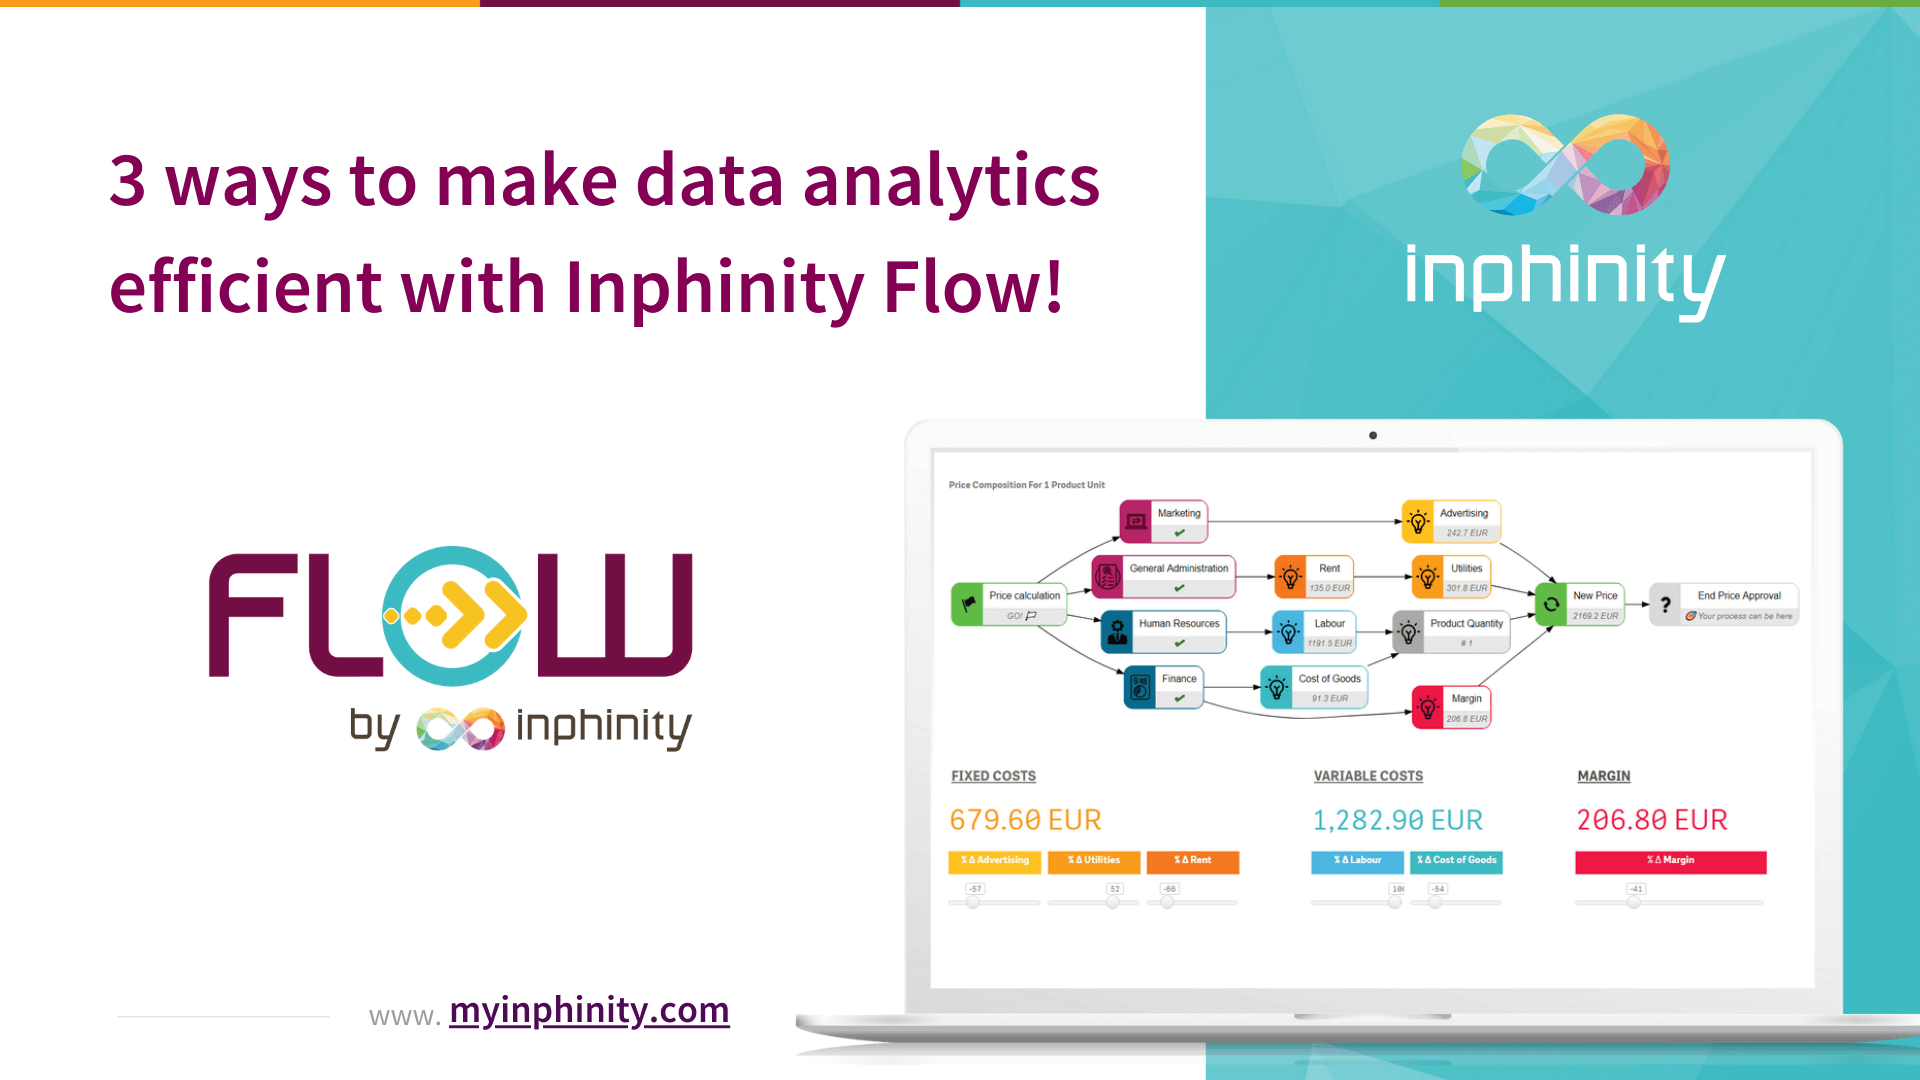 3 ways to make data analytics efficient with Inphinity Flow!